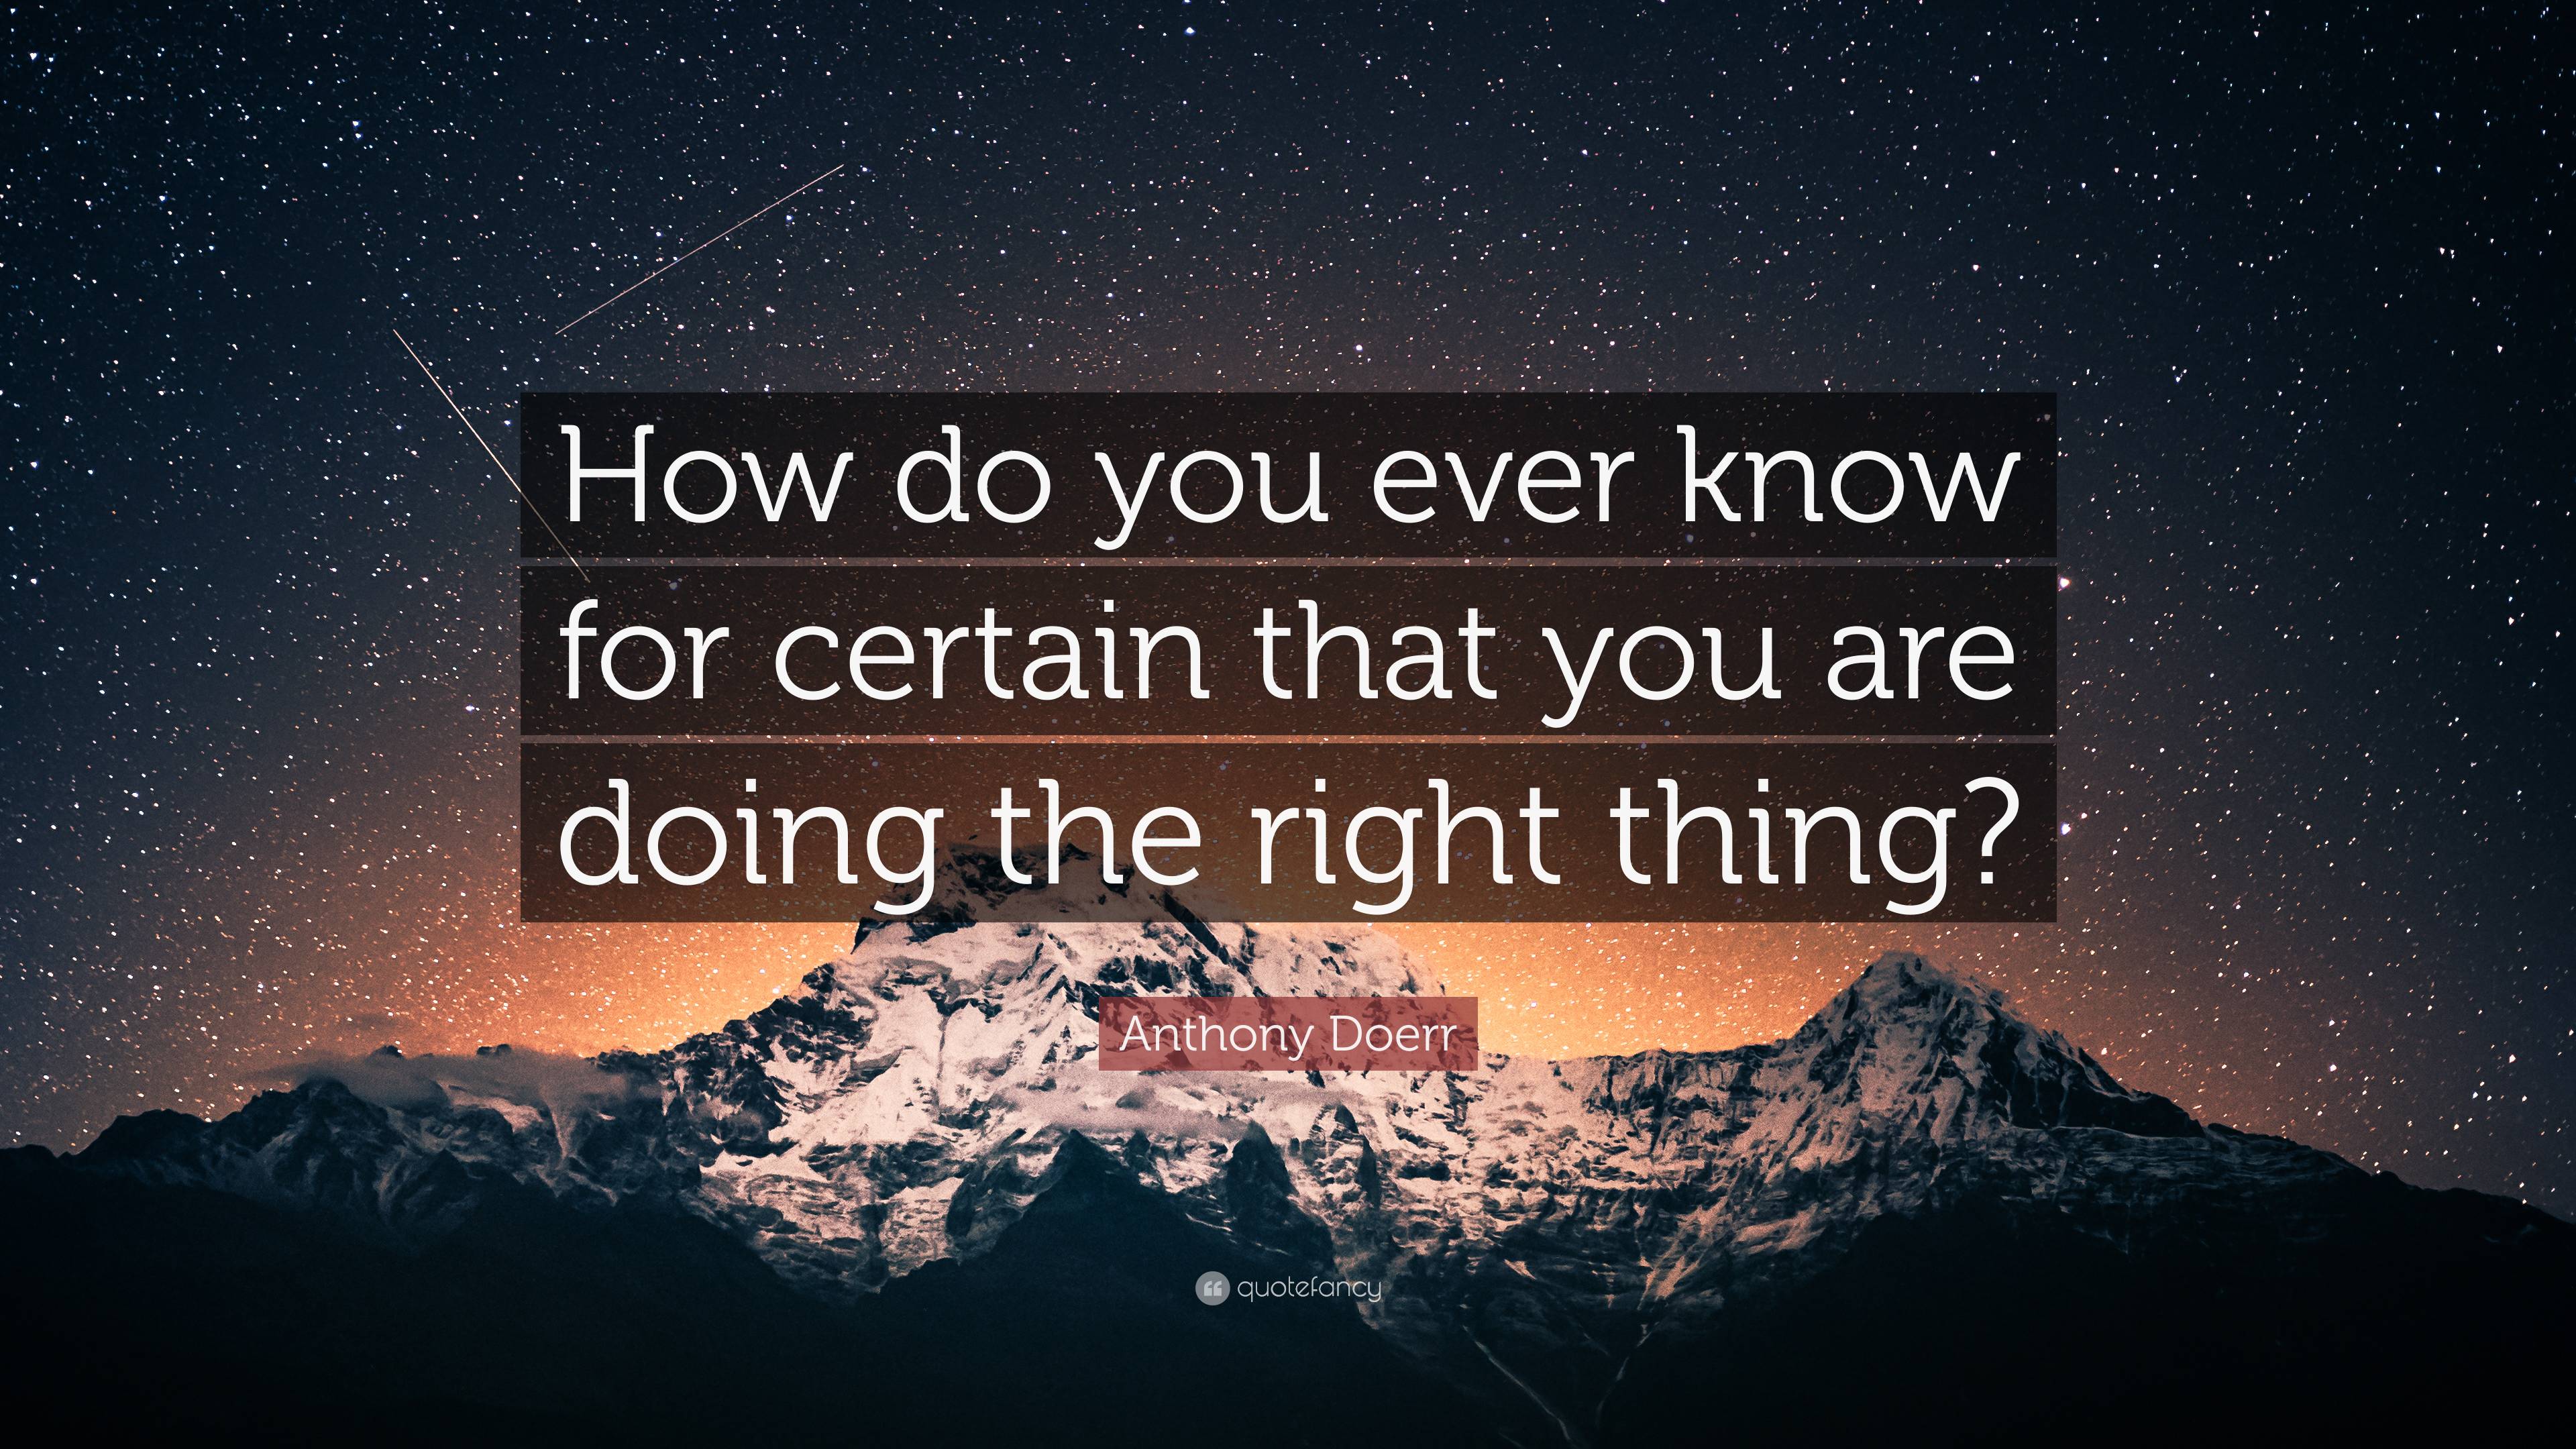 Anthony Doerr Quote “how Do You Ever Know For Certain That You Are Doing The Right Thing” 0807